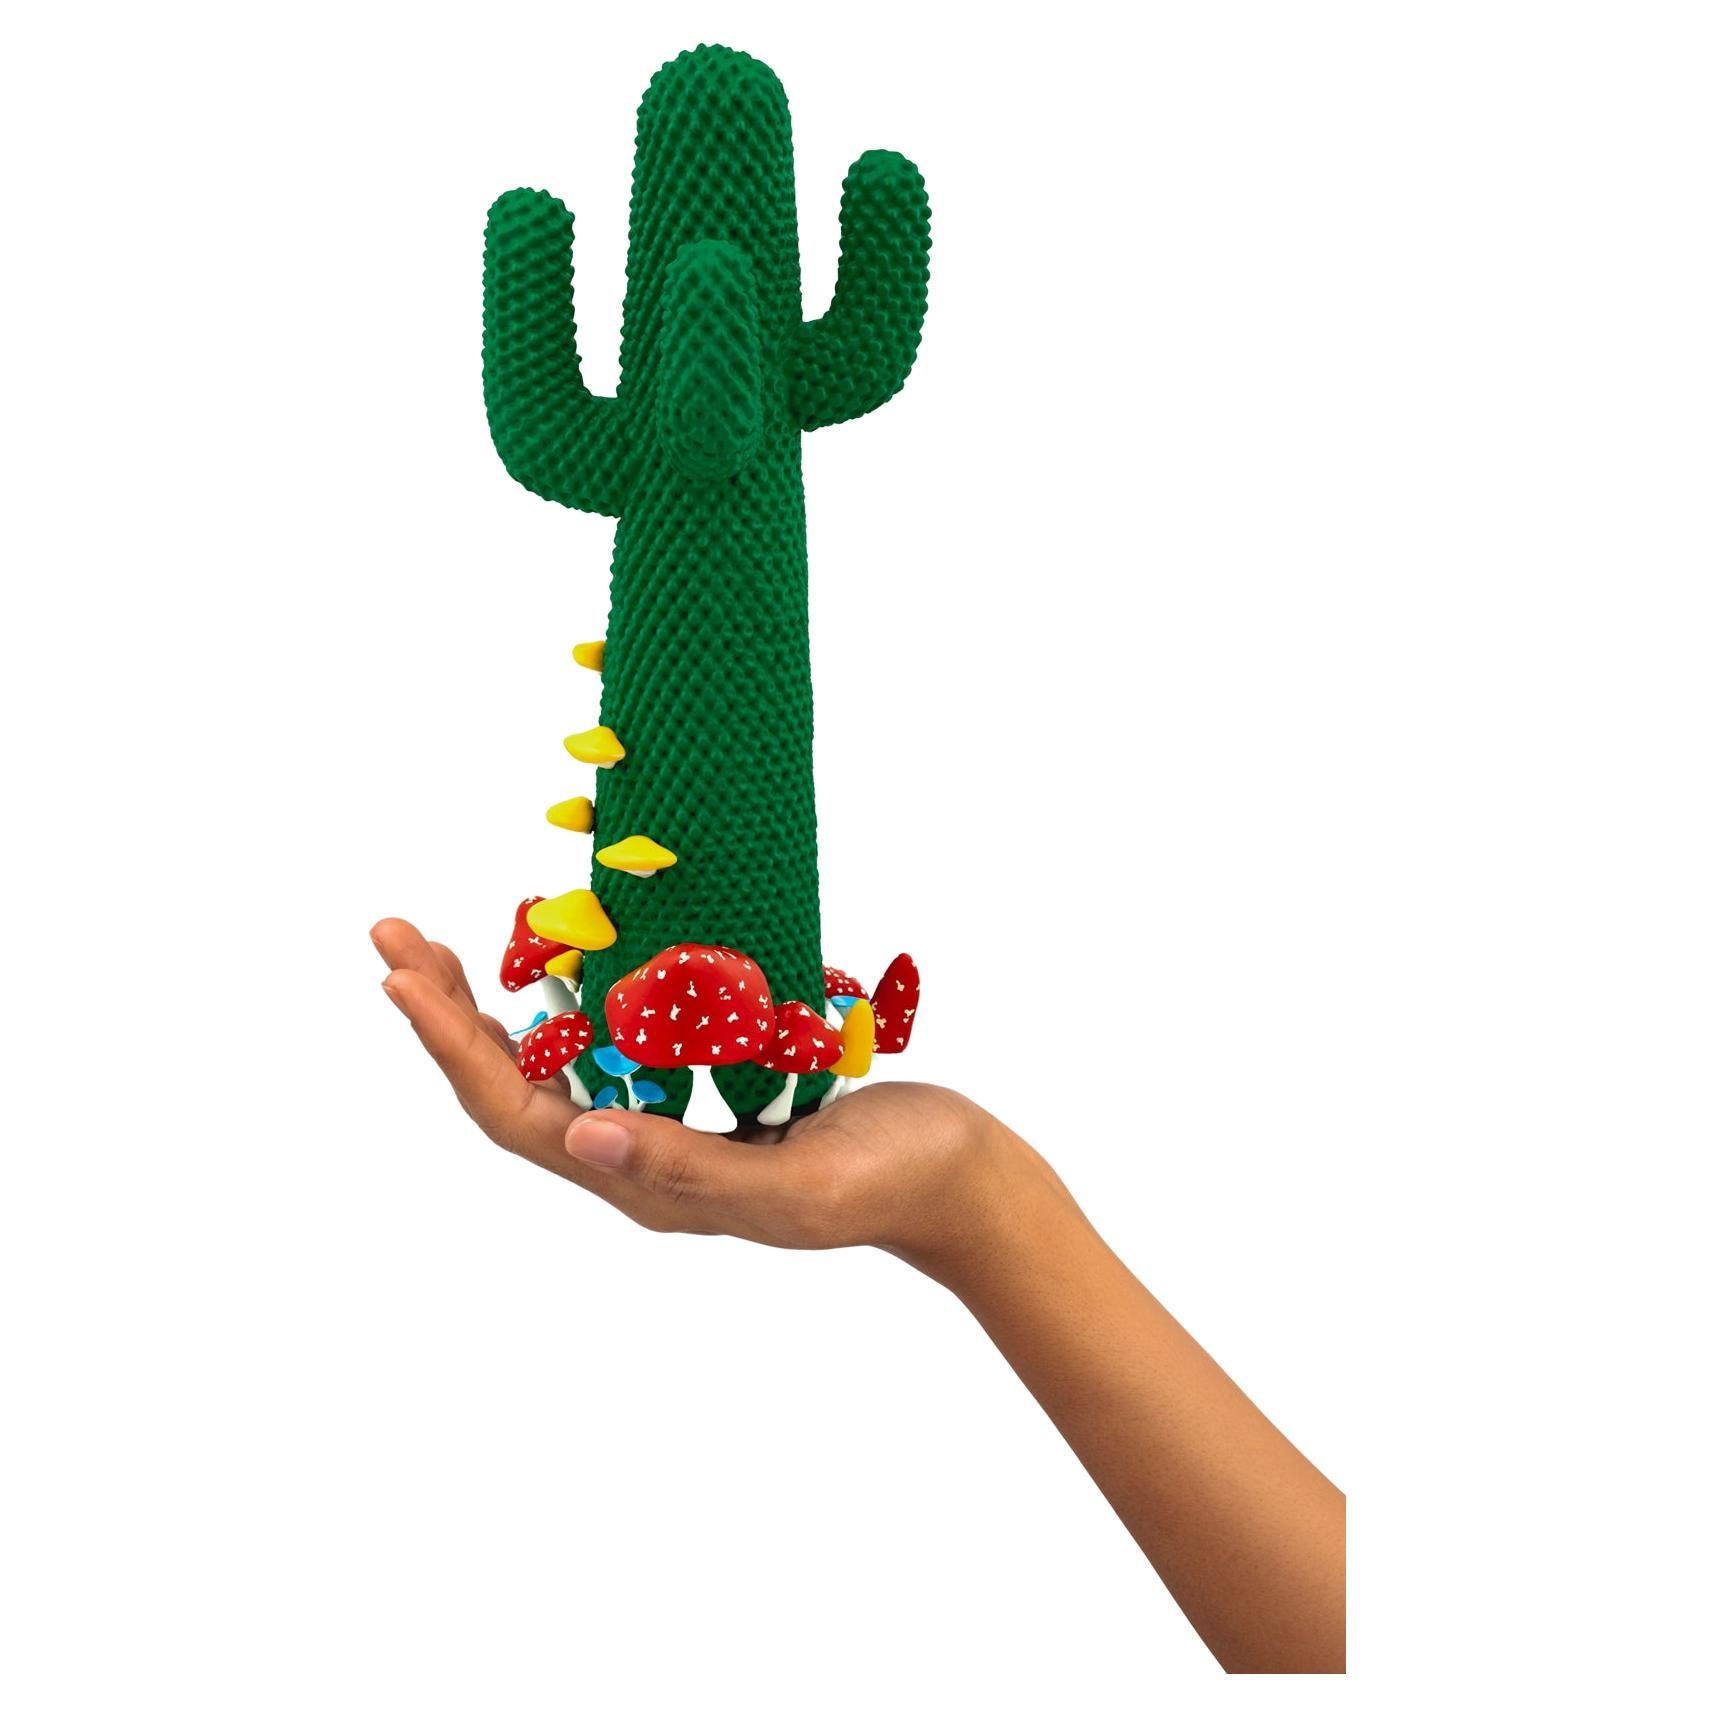 Limited Edition #94/99

Gufram presents the miniaturised version of the Shroom CACTUS® created in collaboration with A$AP Rocky and the artist’s new design studio HOMMEMADE Exactly as the real-size Shroom CACTUS®, the new Guframini piece features